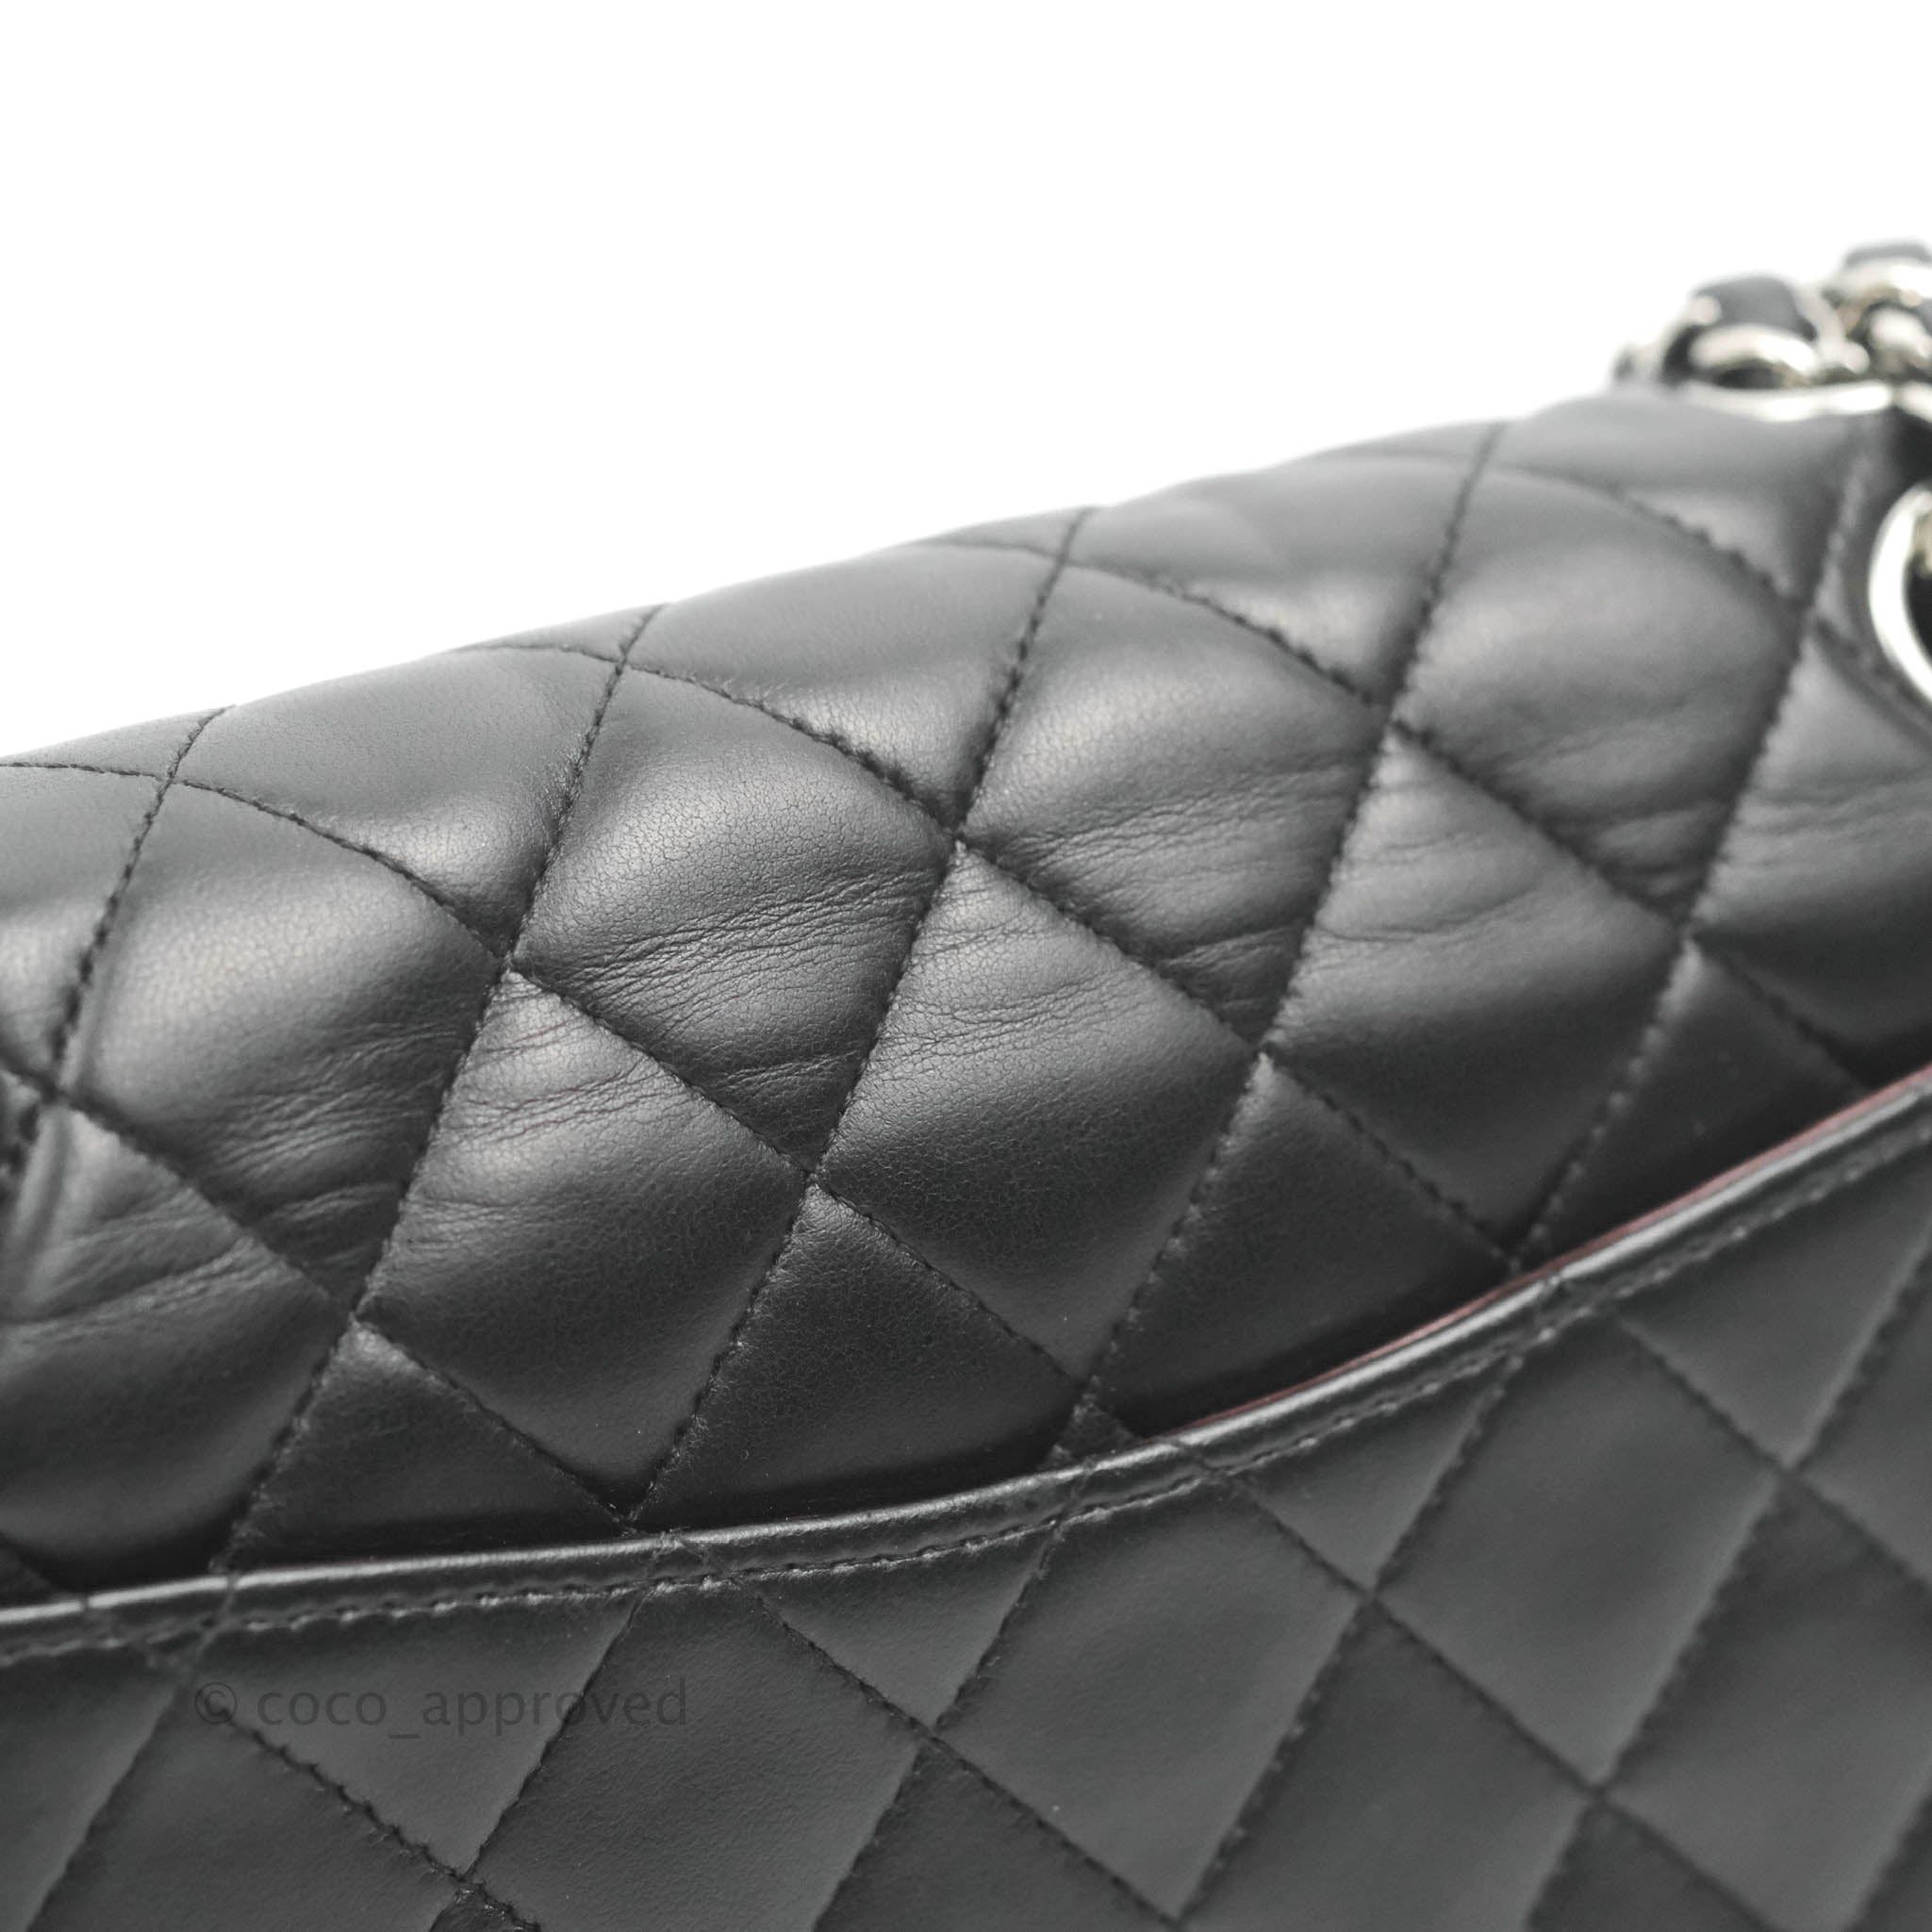 Chanel Small Classic Quilted Flap Black Lambskin Silver Hardware – Coco  Approved Studio